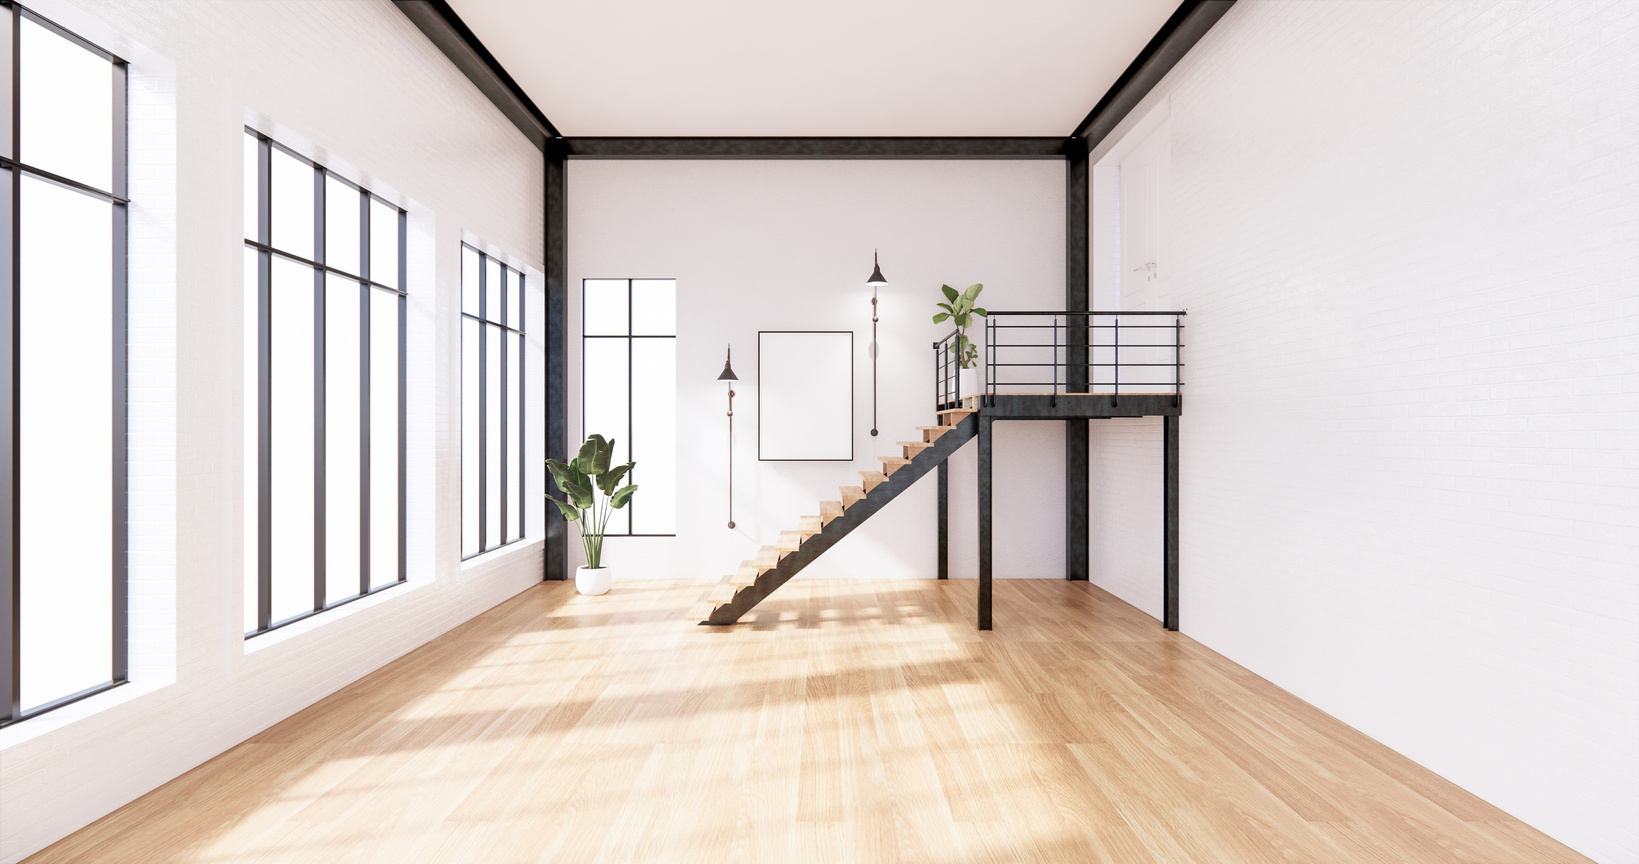 3D Rendered Room Interior with Loft